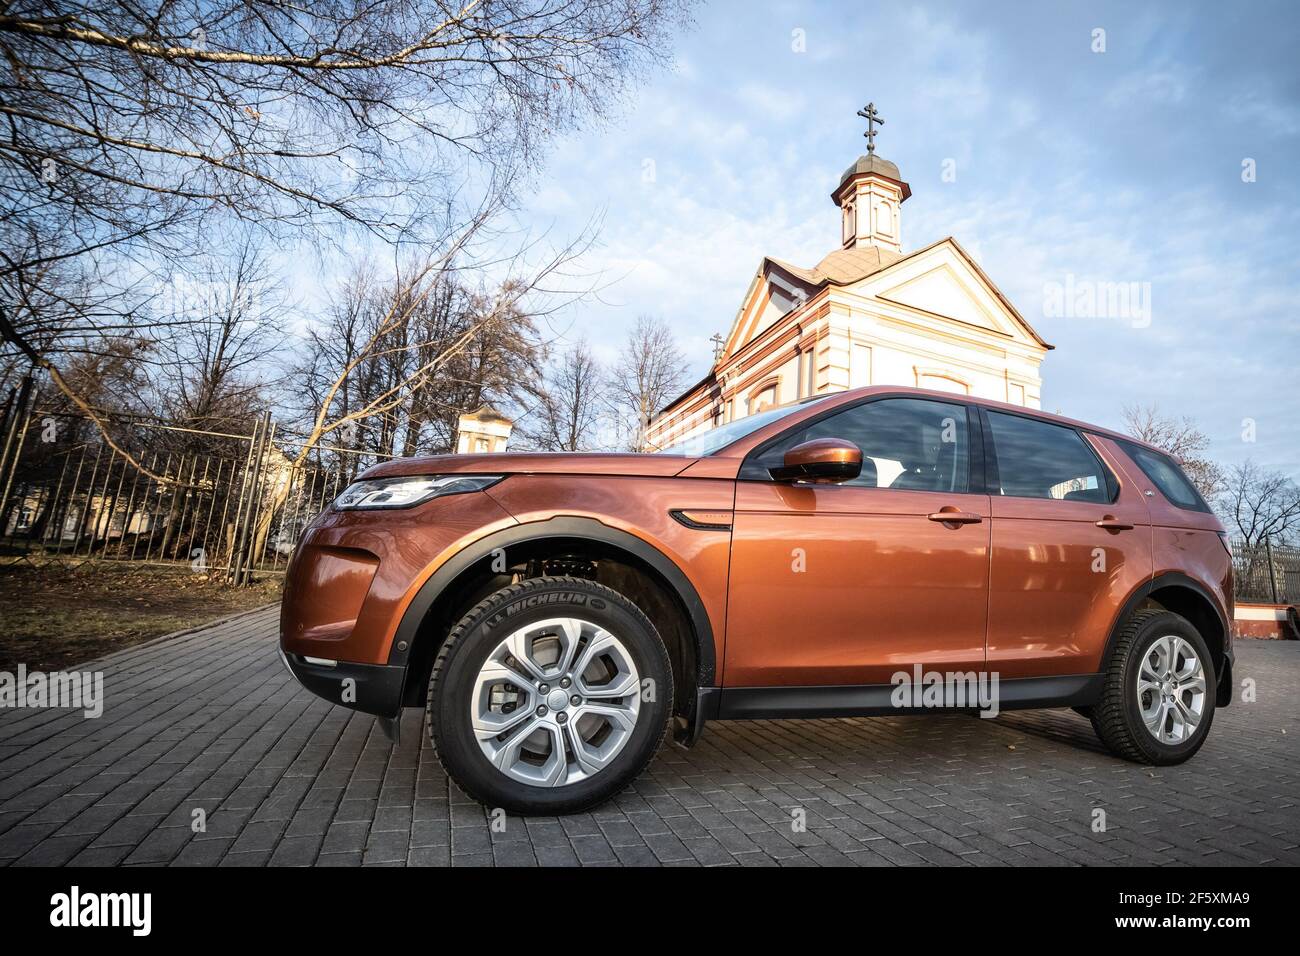 Moscow, Russia - December 20, 2019: side View of all new premium england suv. Land rover Discovery sport parked near chirsh. Orange all wheel drive car standed on the ground. Stock Photo